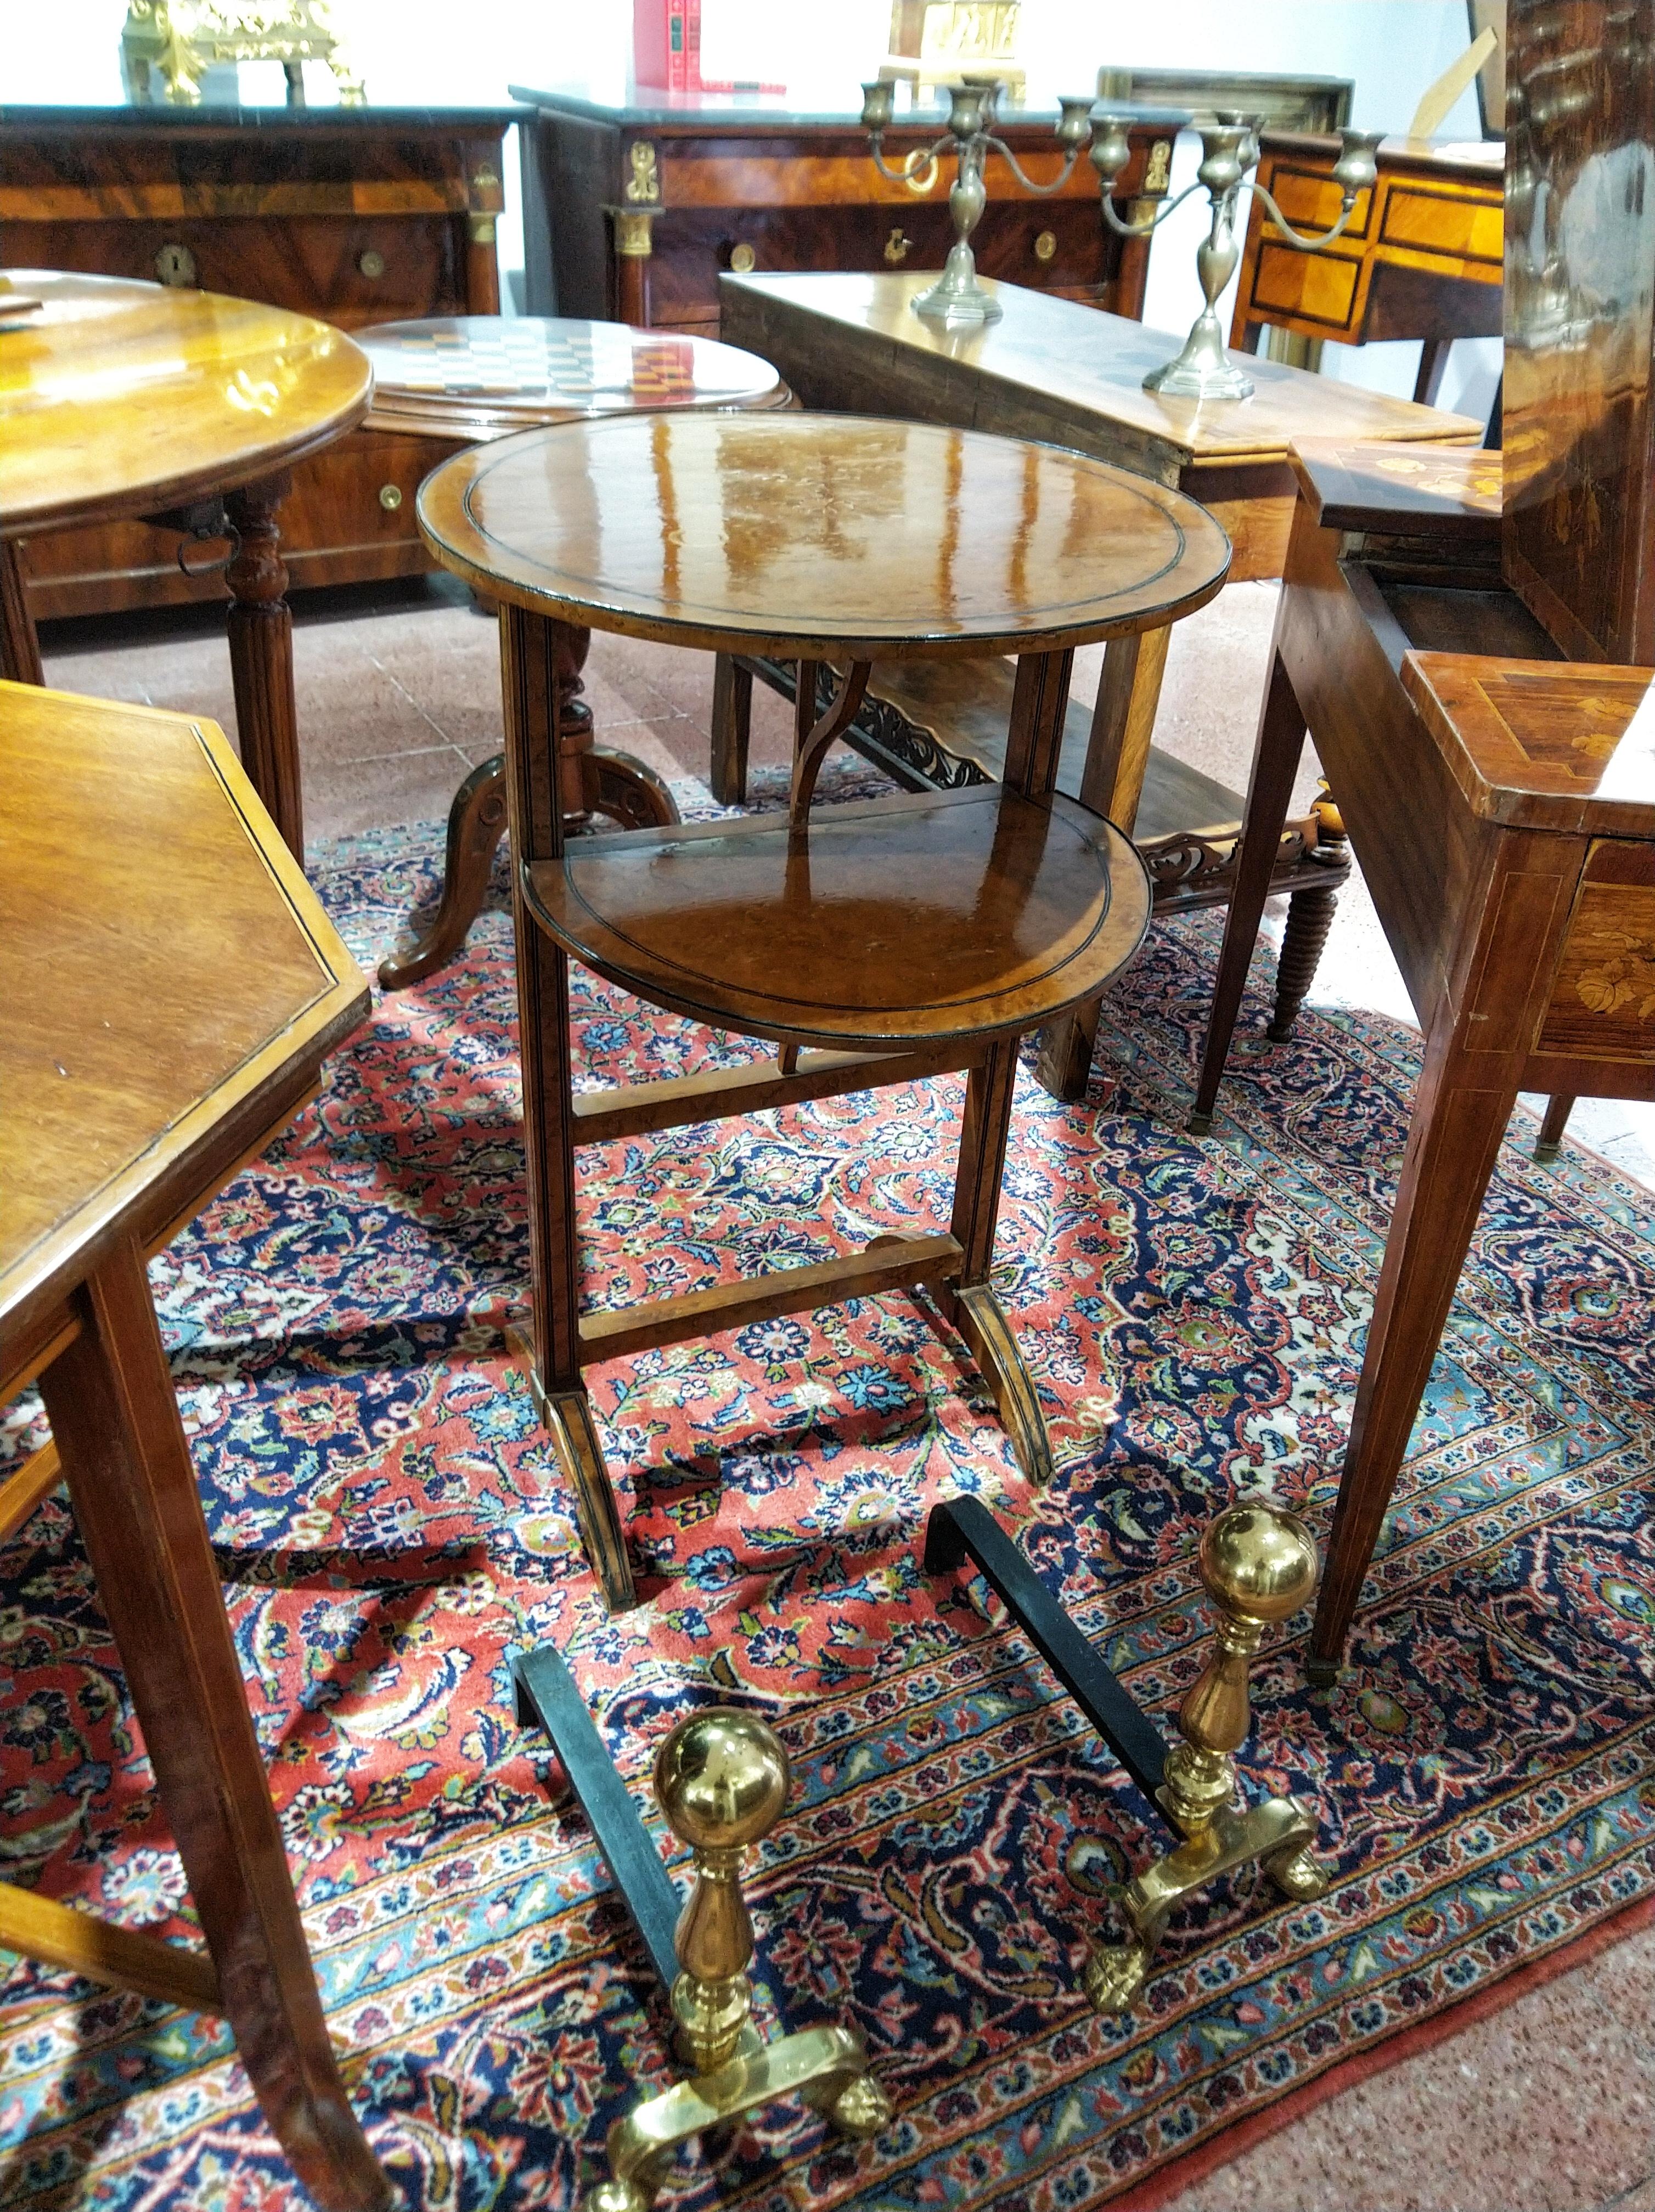 Fine Italian side table, Napoleon III, second half of the 19th century, inlaid, thuja root.

Small folding table with two shelves. Threaded and inlaid, ideal for a salon.

The Napoleon III style was a highly eclectic style of architecture and